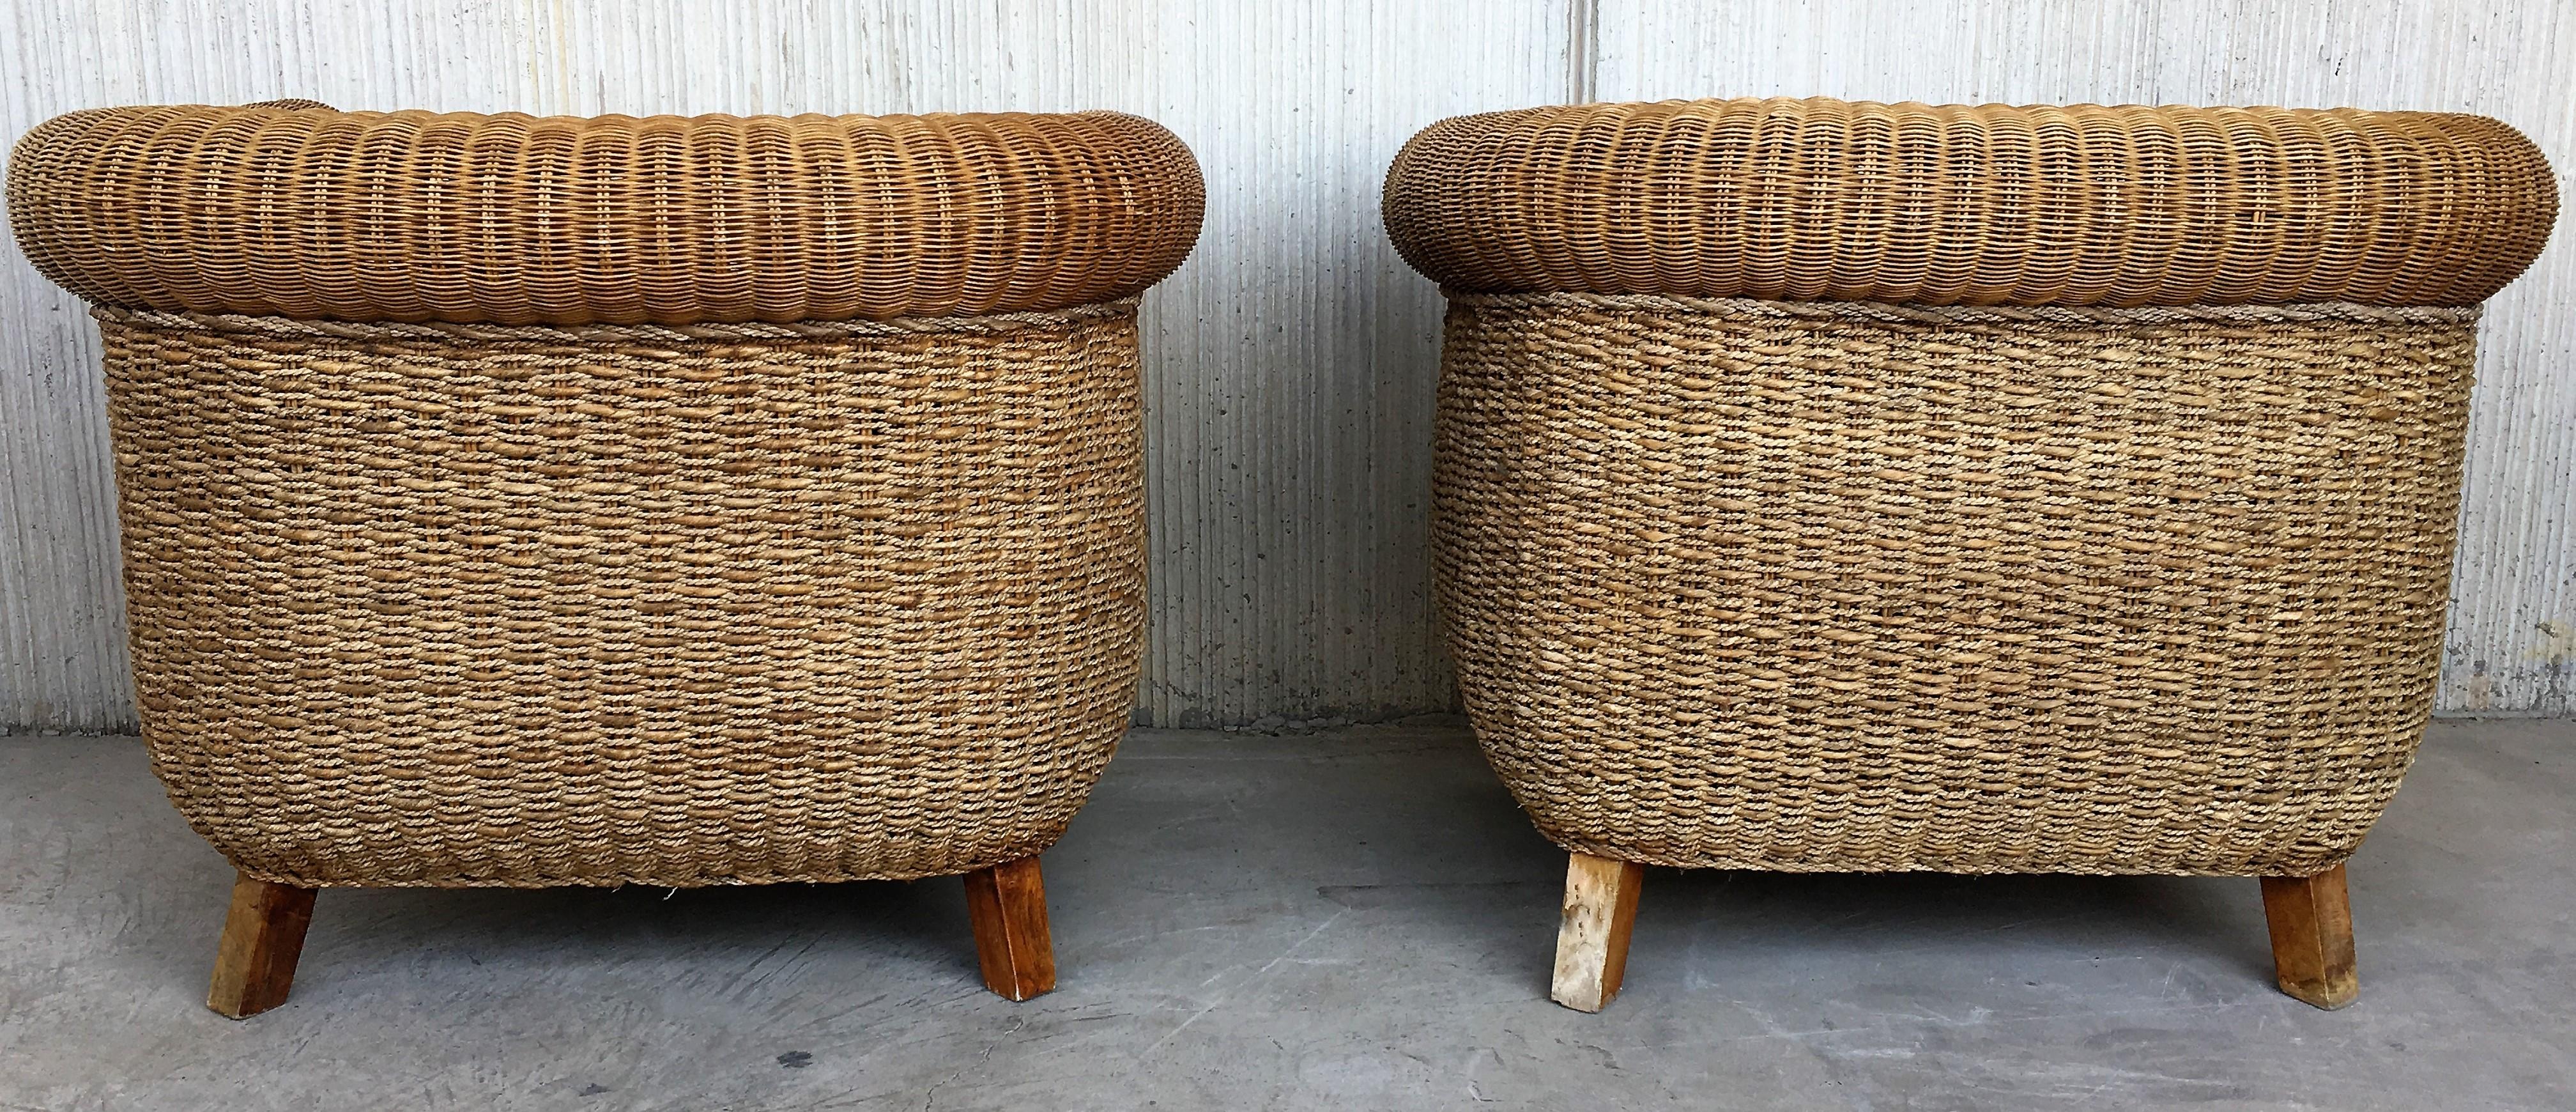 Midcentury Rattan and Wood Coffee Table For Sale 2